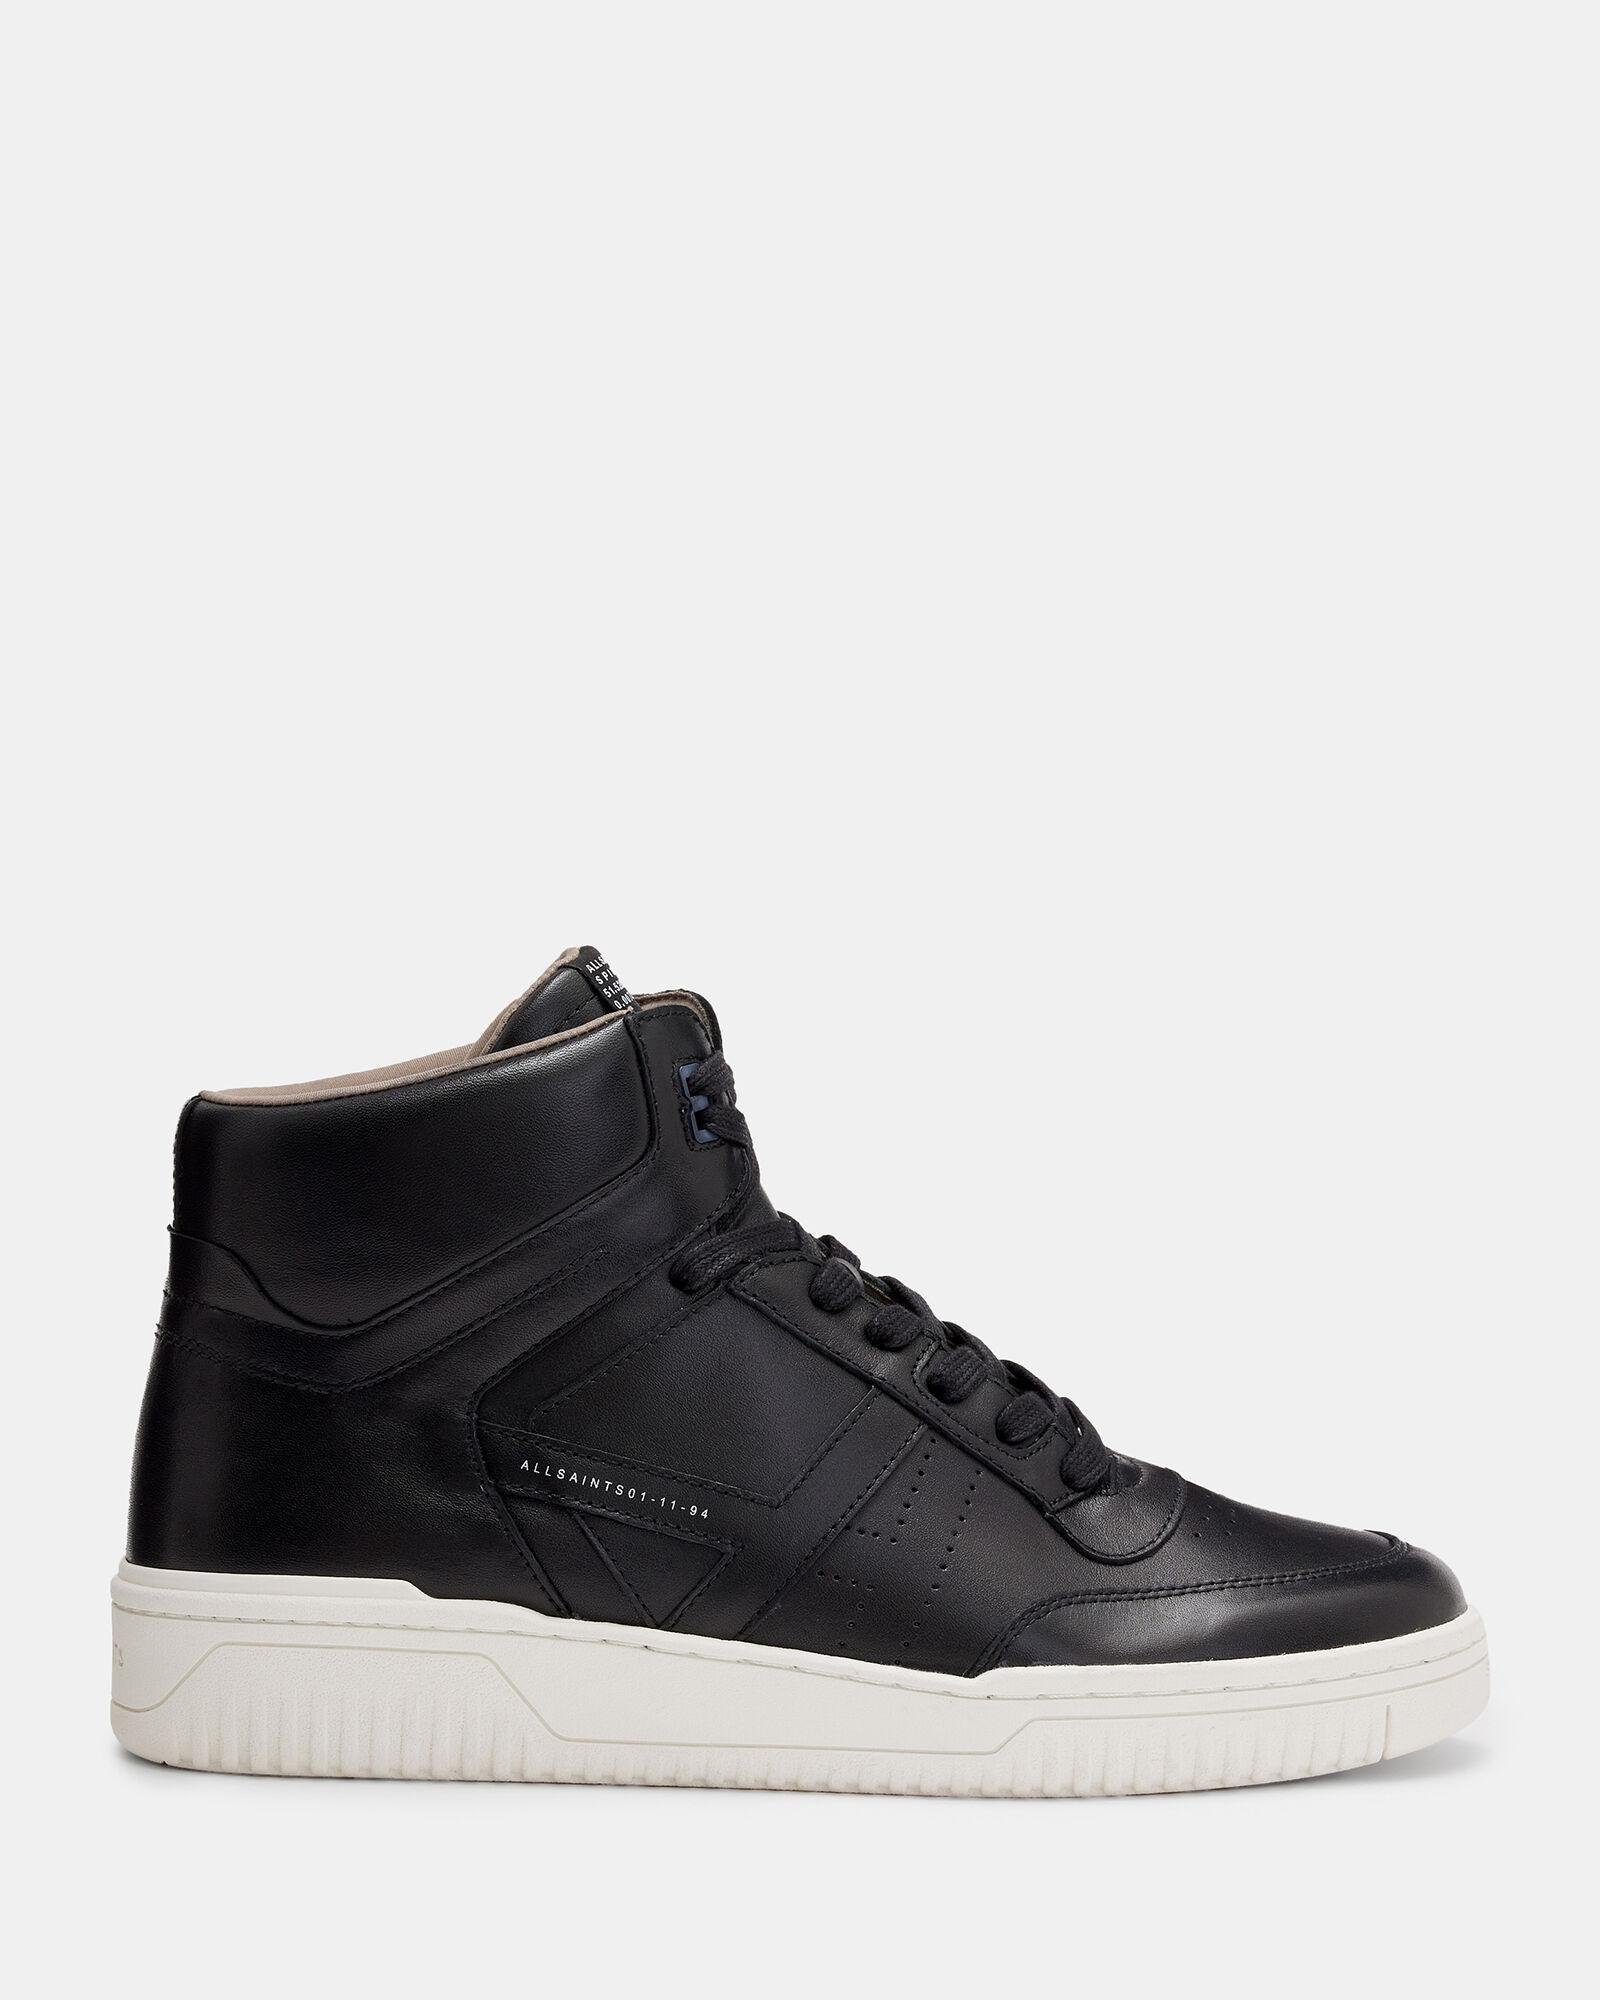 Pro Leather High Top Sneakers by ALLSAINTS